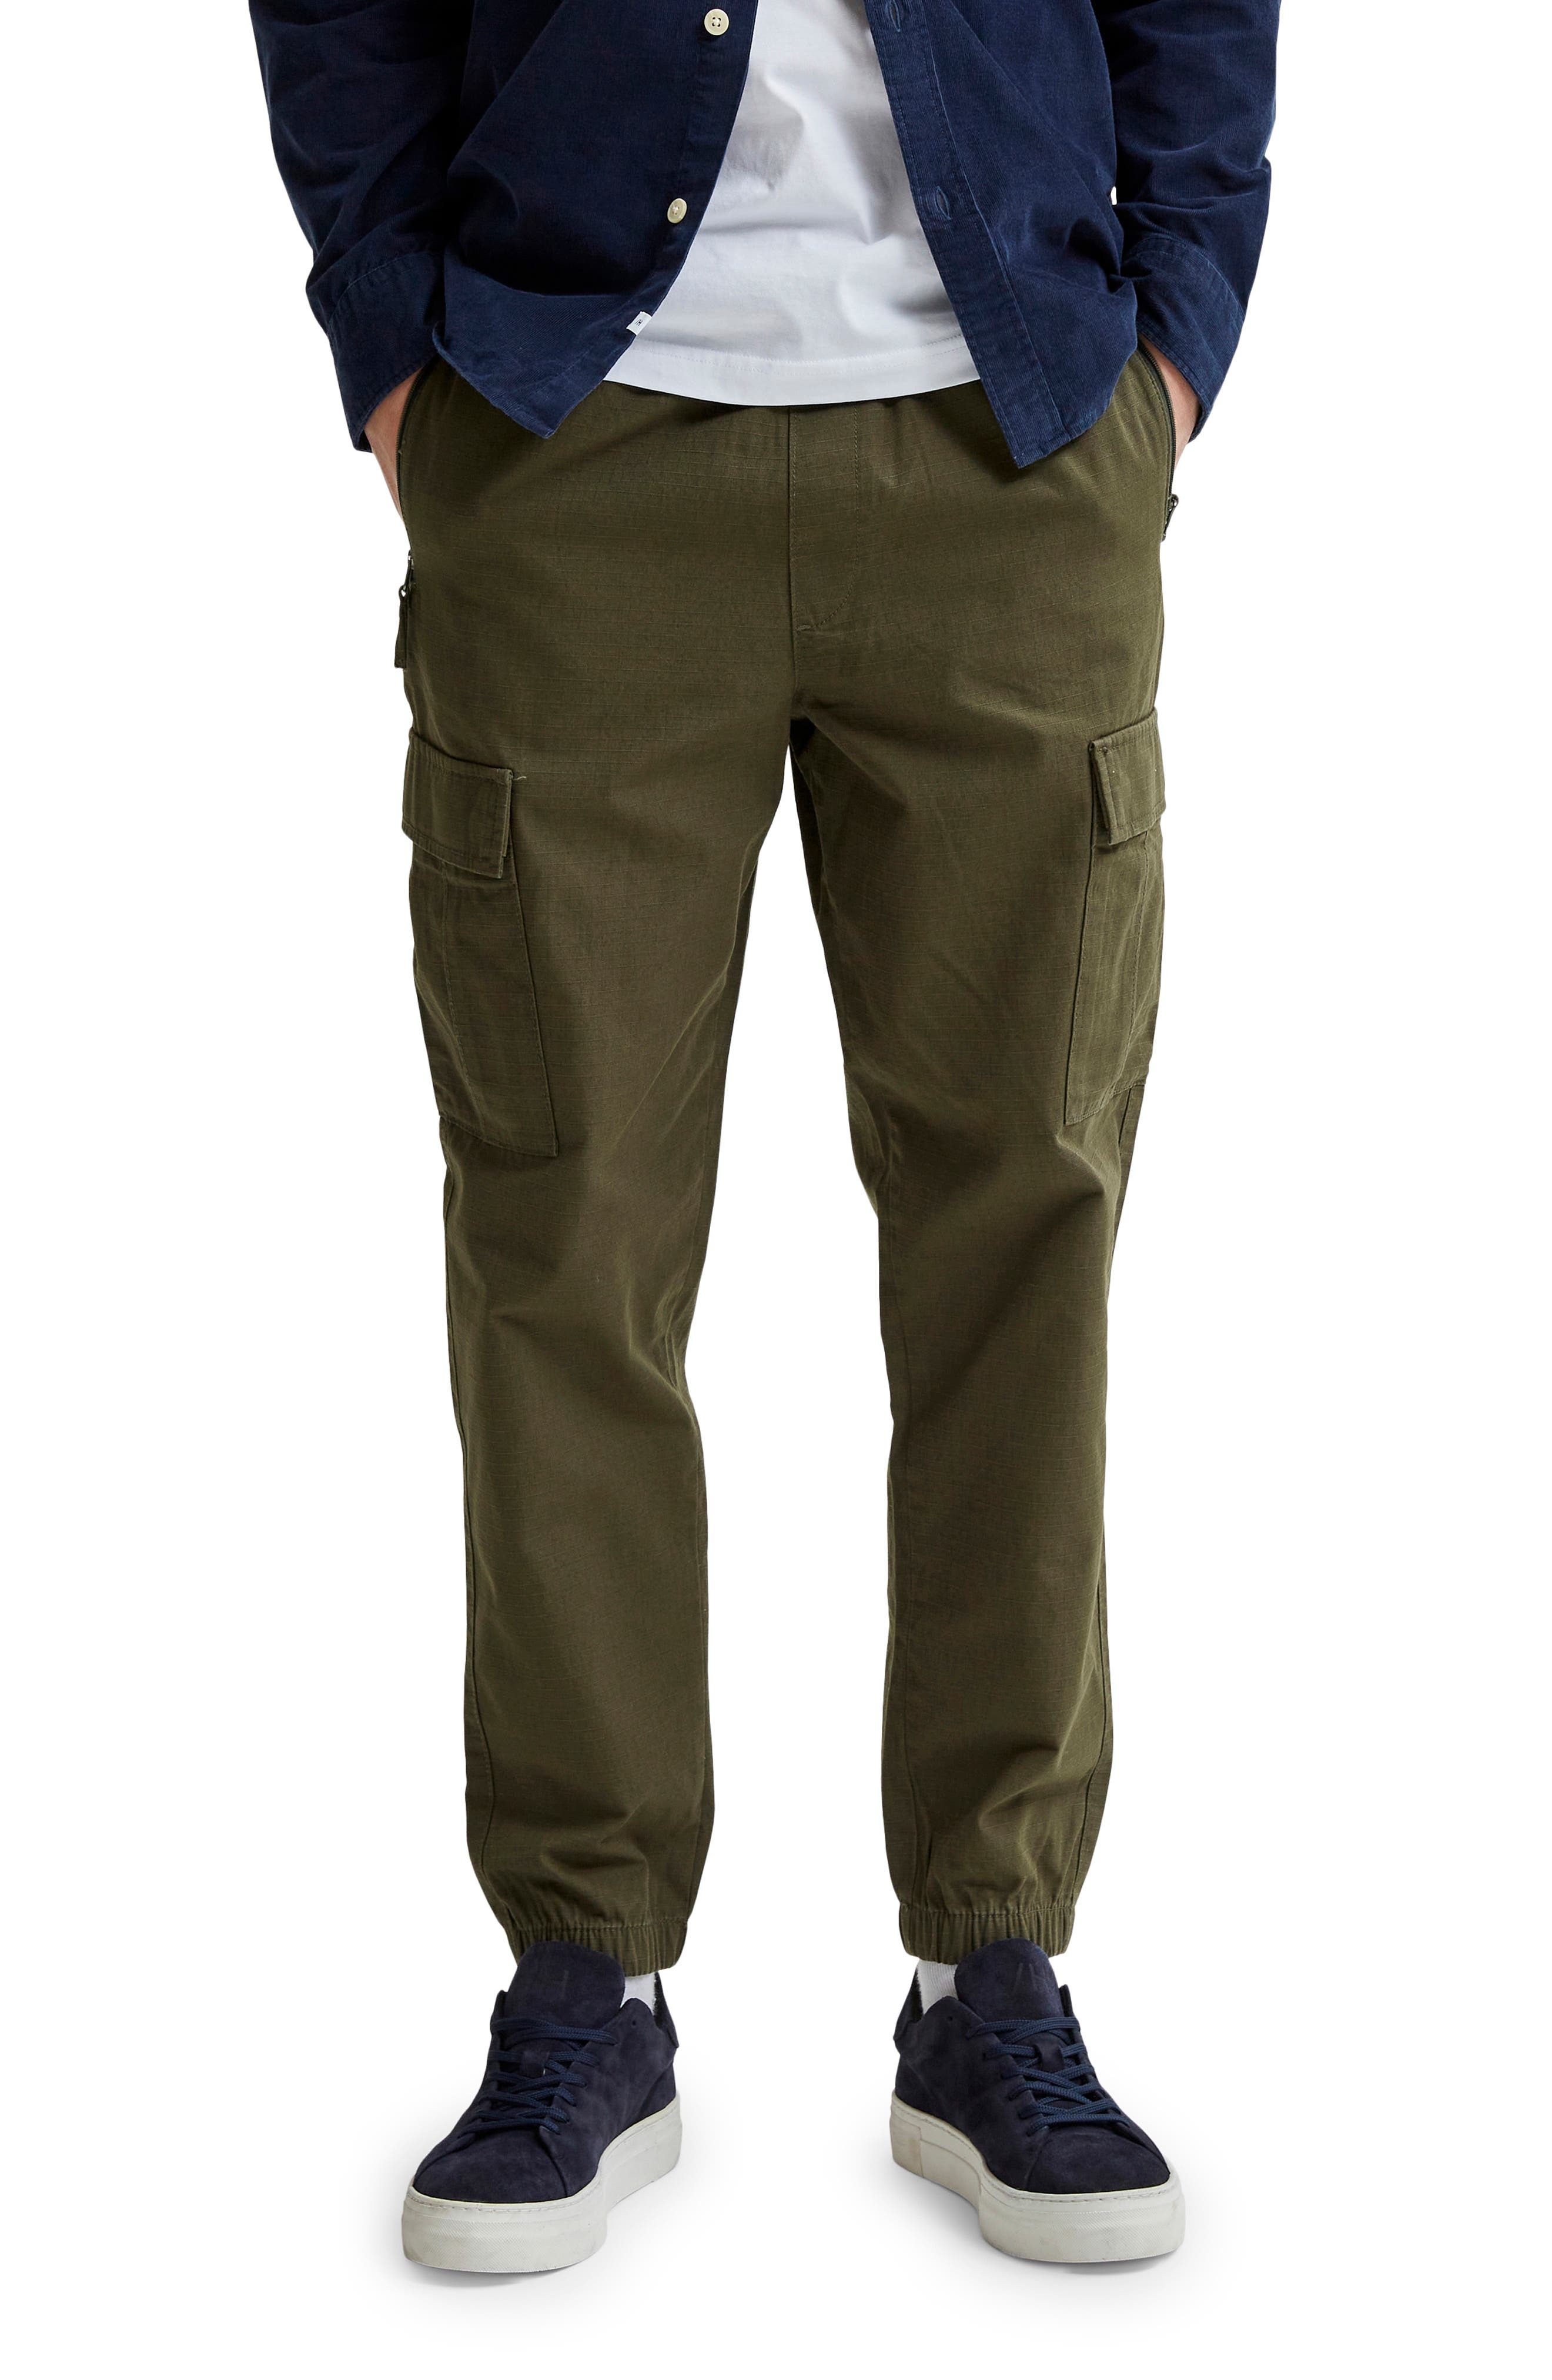 Selected Homme Noah Organic Cotton Cargo Joggers, $44 | Nordstrom ...